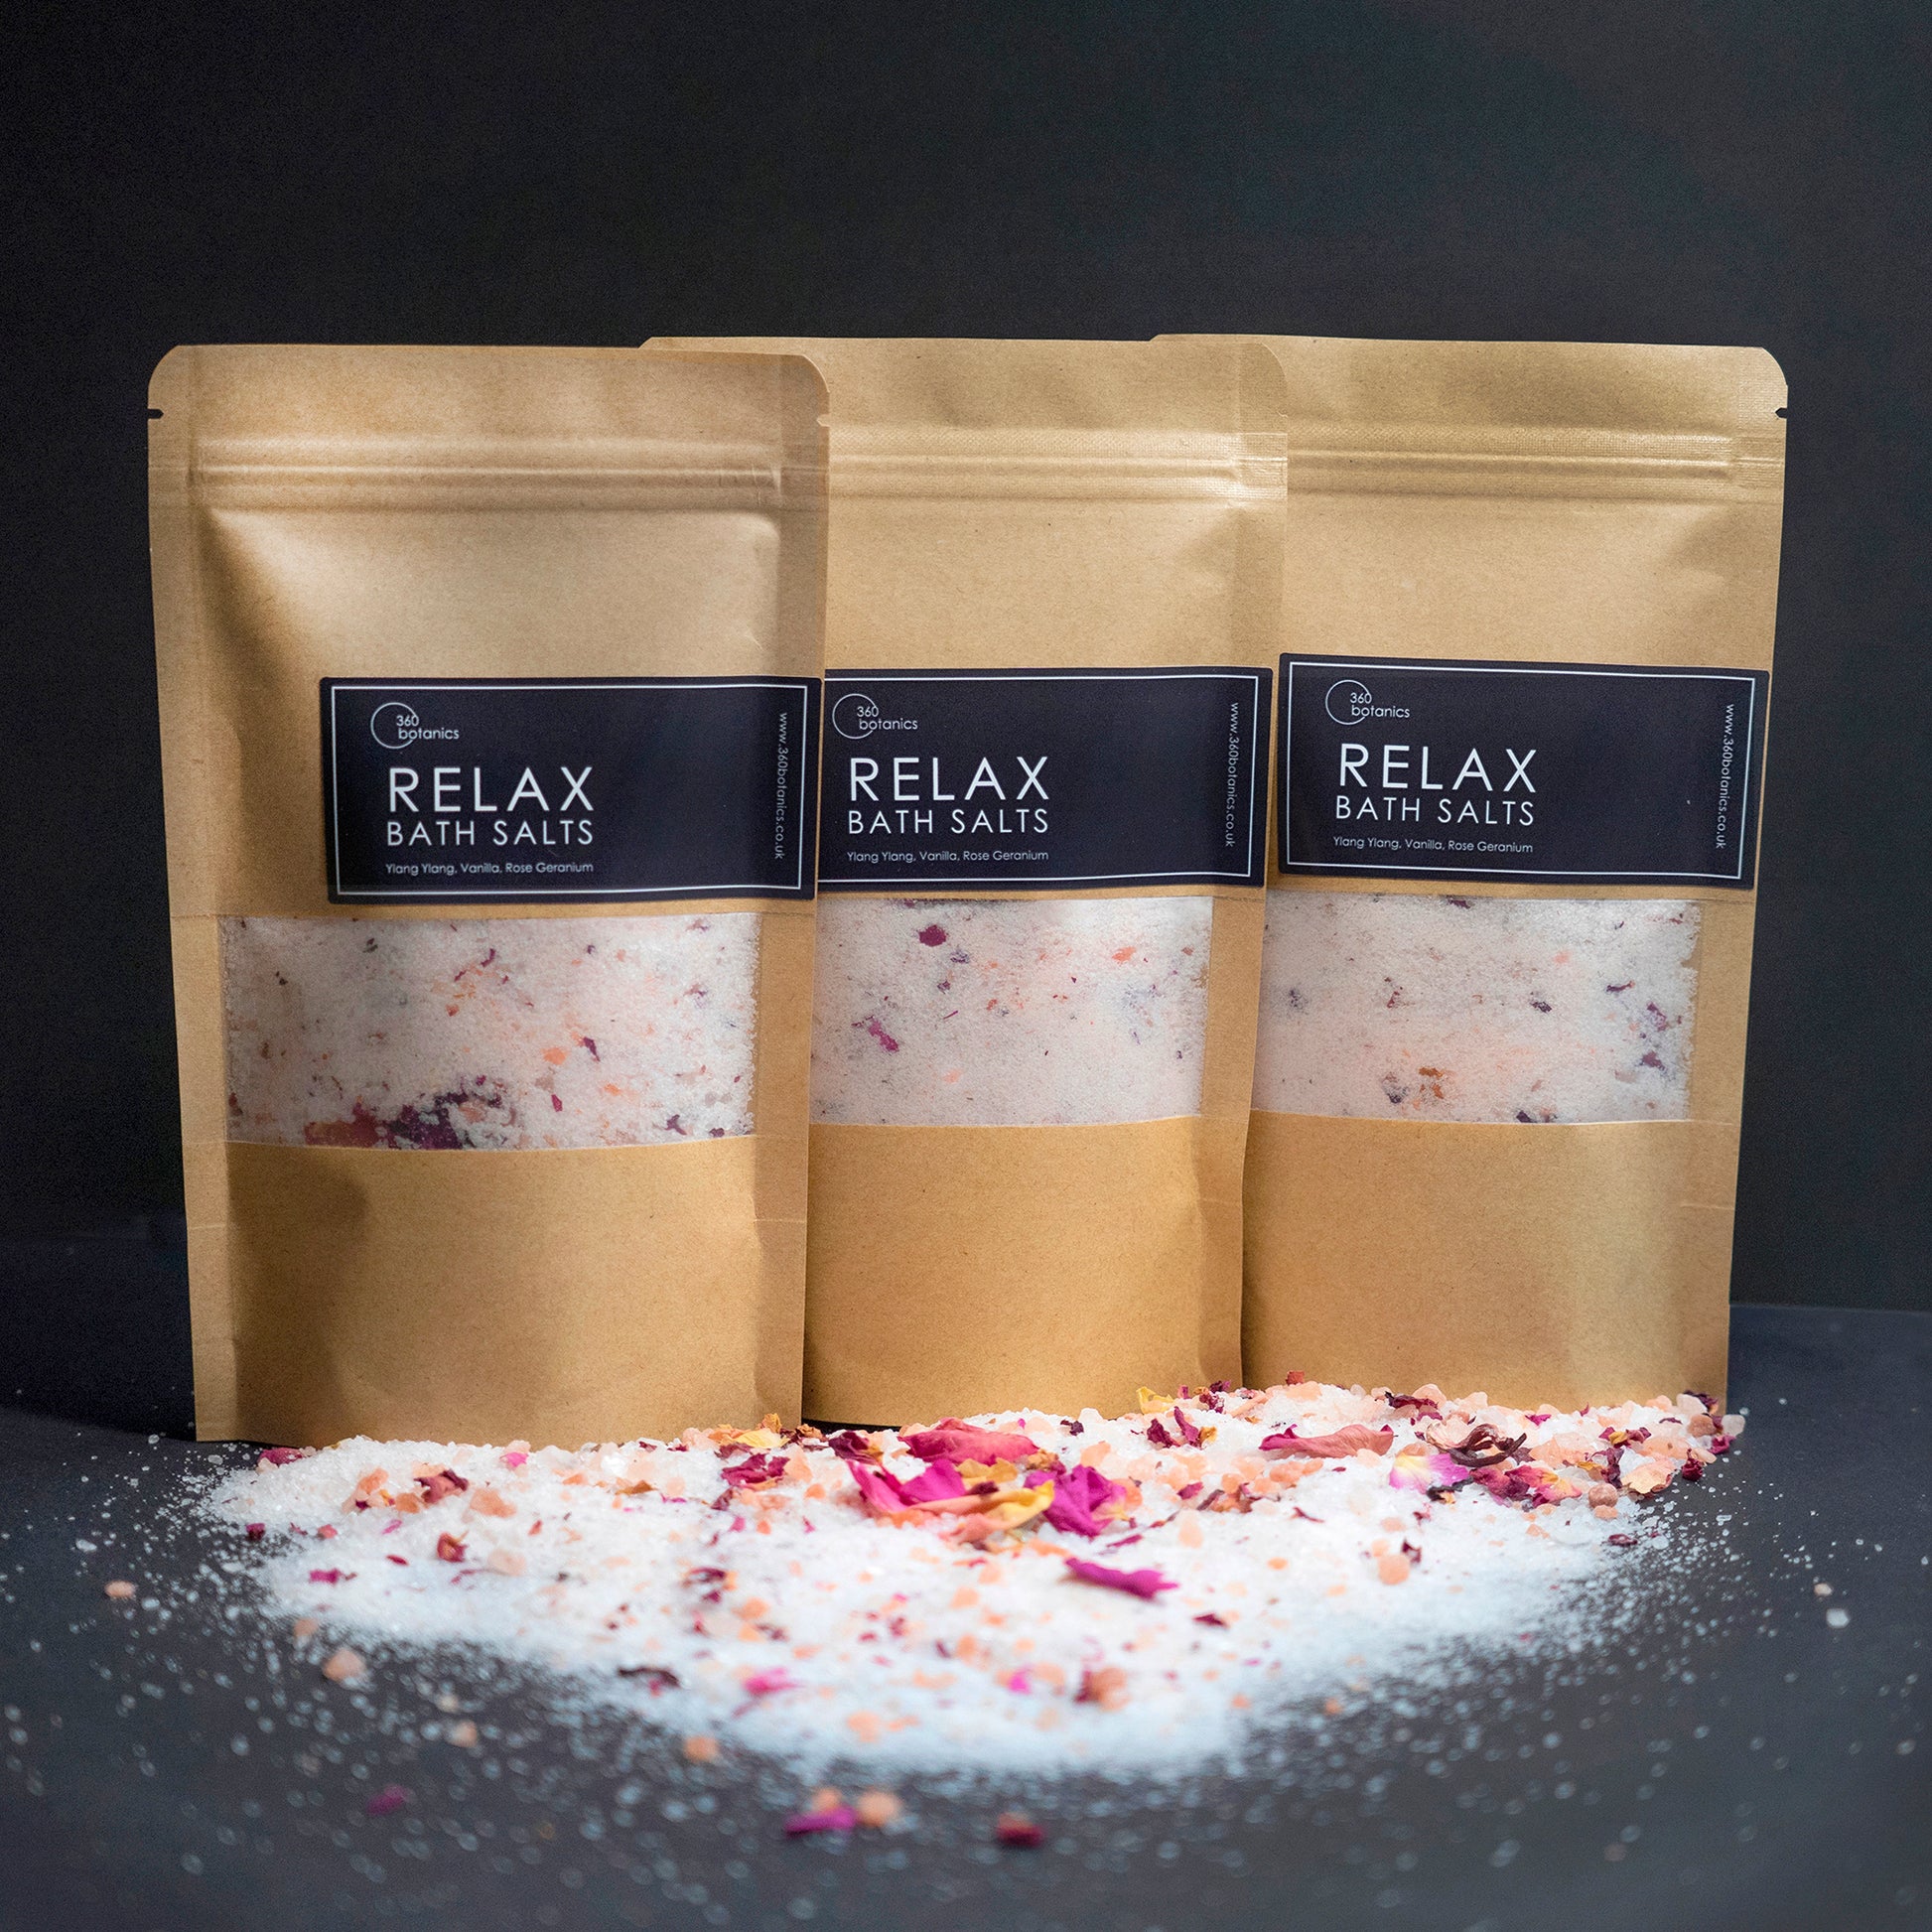  The image displays three identical packages of "360 Botanics RELAX BATH SALTS" lined up against a black background. The packaging is a natural brown kraft paper with a see-through window showing pink and white bath salts with dried flower petals. A small amount of the product is scattered in front of the pouches, highlighting their contents. The label mentions key ingredients: Ylang Ylang, Vanilla, and Geranium. The presentation suggests an organic and luxurious bath product.